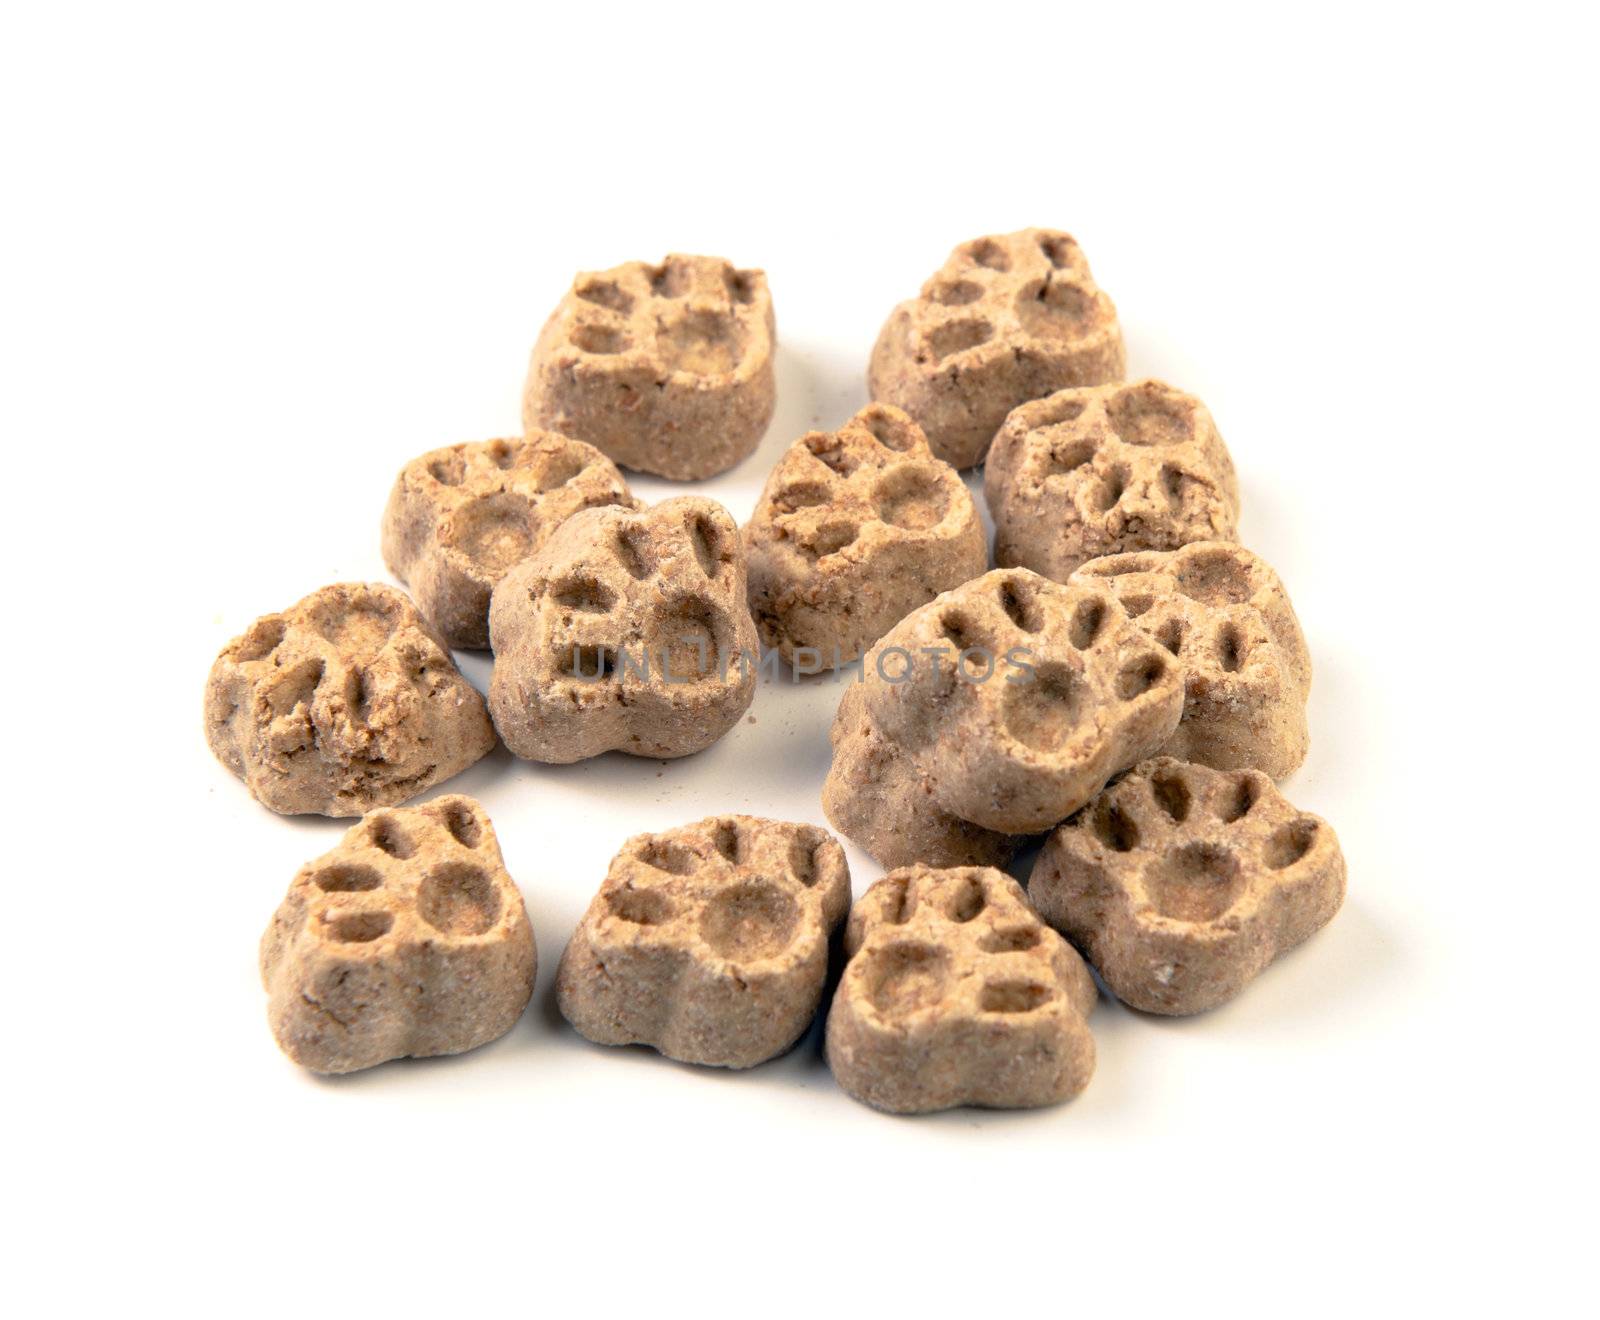 A small pile of dog treats in the form of paws, shot on a white background.